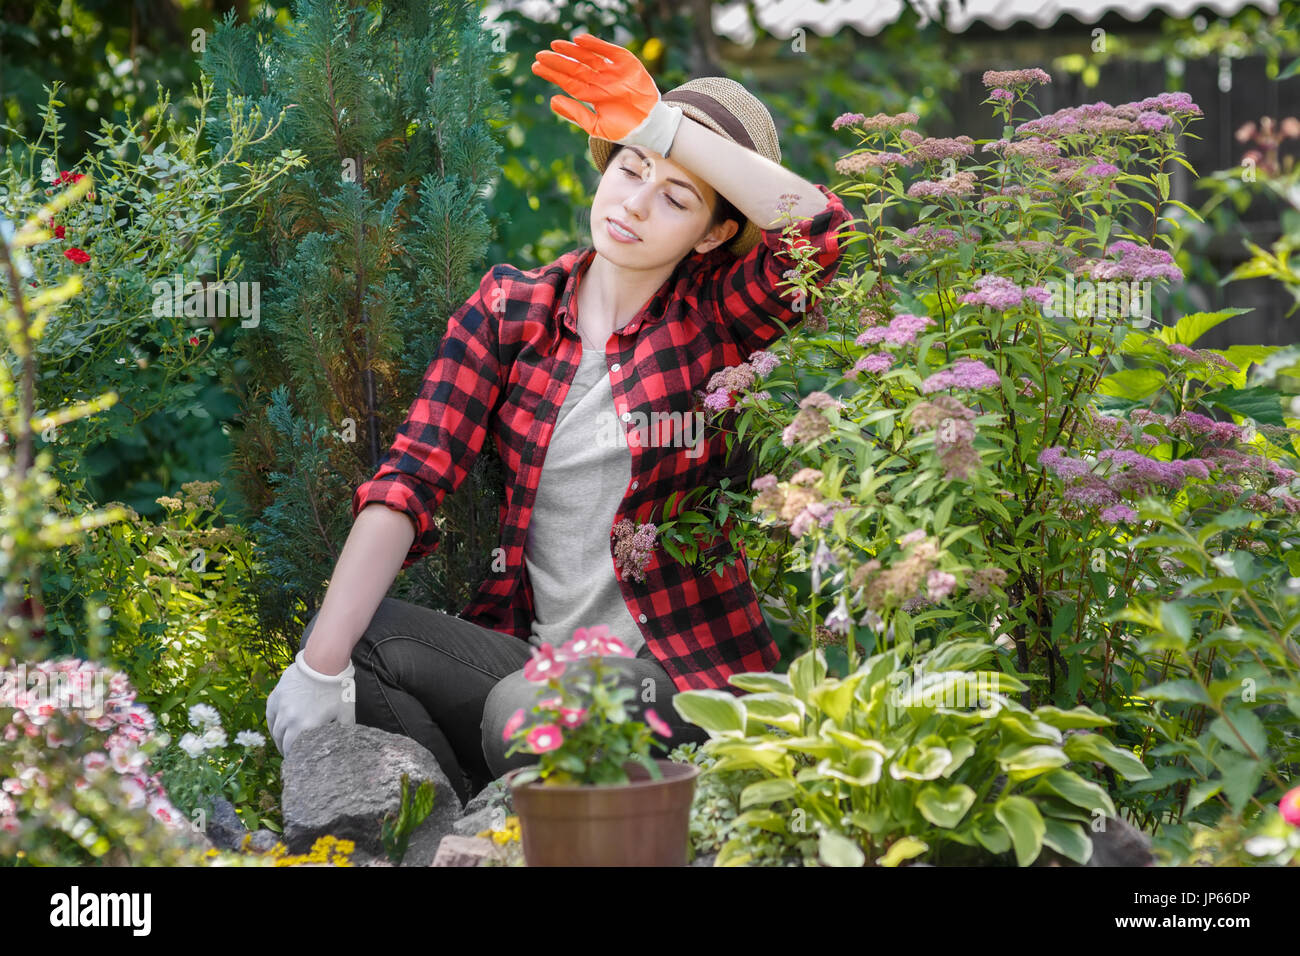 tired young woman gardener Stock Photo